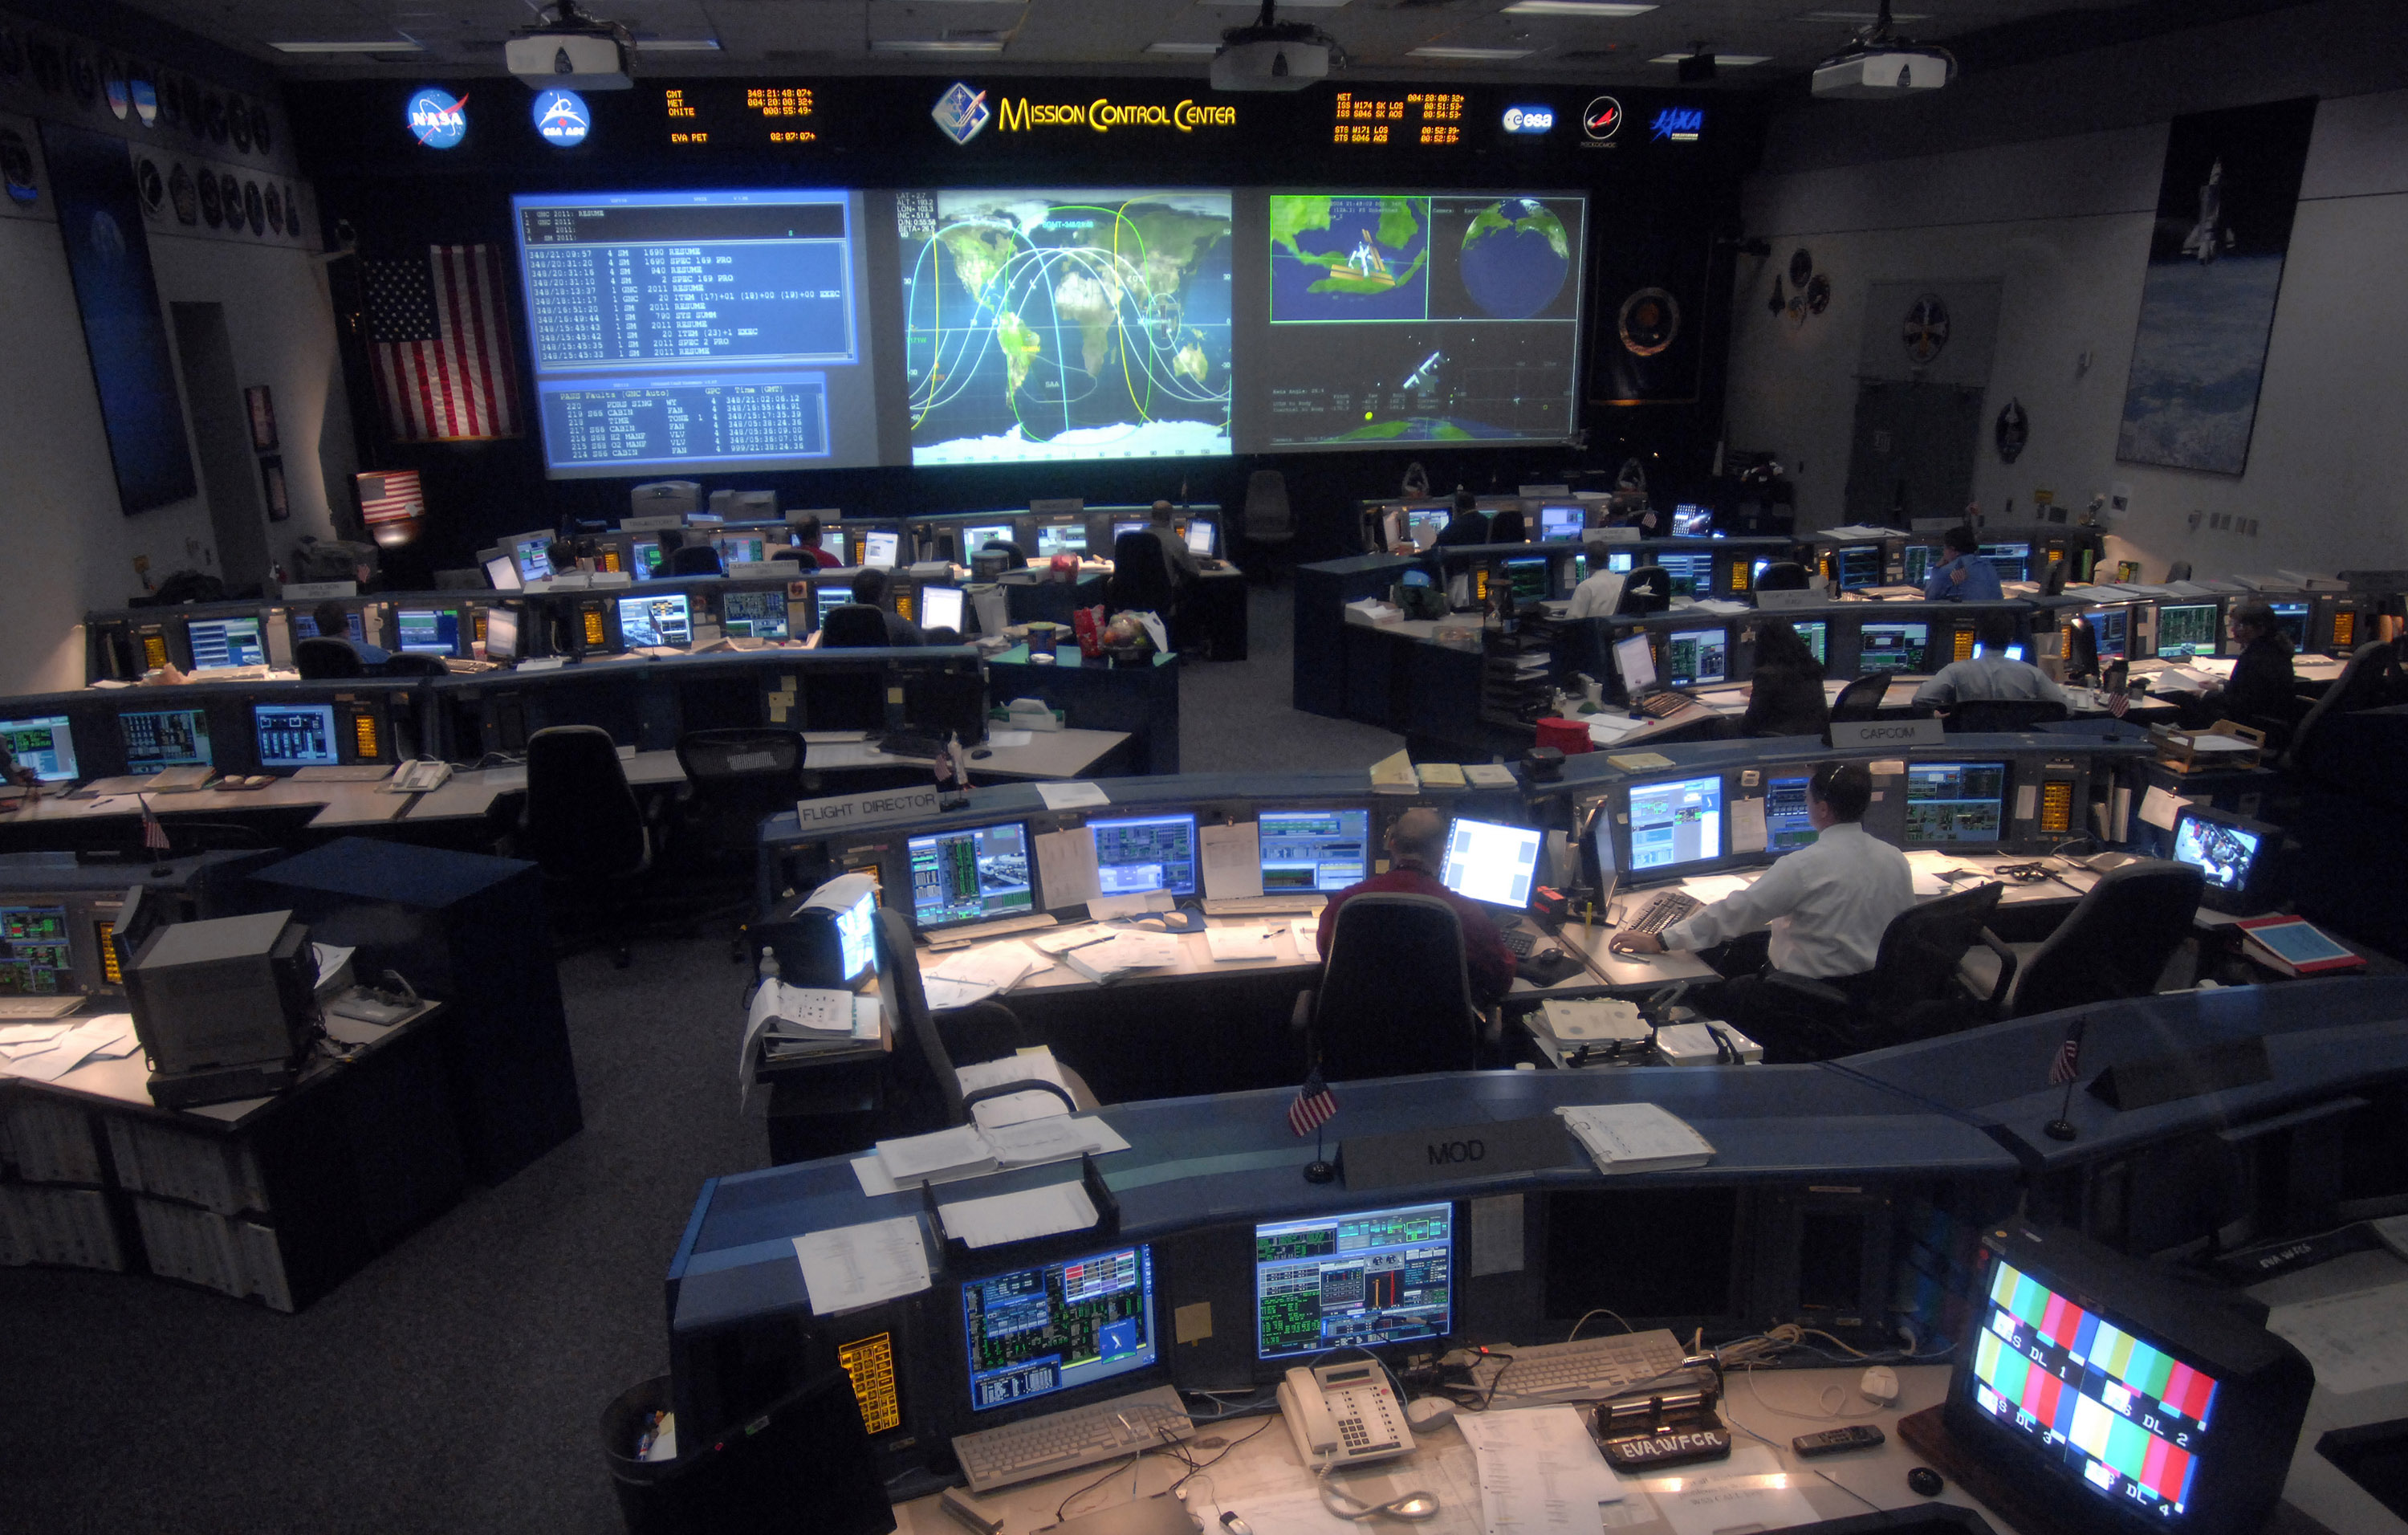 Astronauts work in the Mission Control Center during a space shuttle mission to the International Space Center Dec. 15 at the Johnson Space Center in Houston. (U.S. Air Force photo/Tech. Sgt. Larry Simmons); source: https://www.af.mil/News/Photos/igphoto/2000525294/